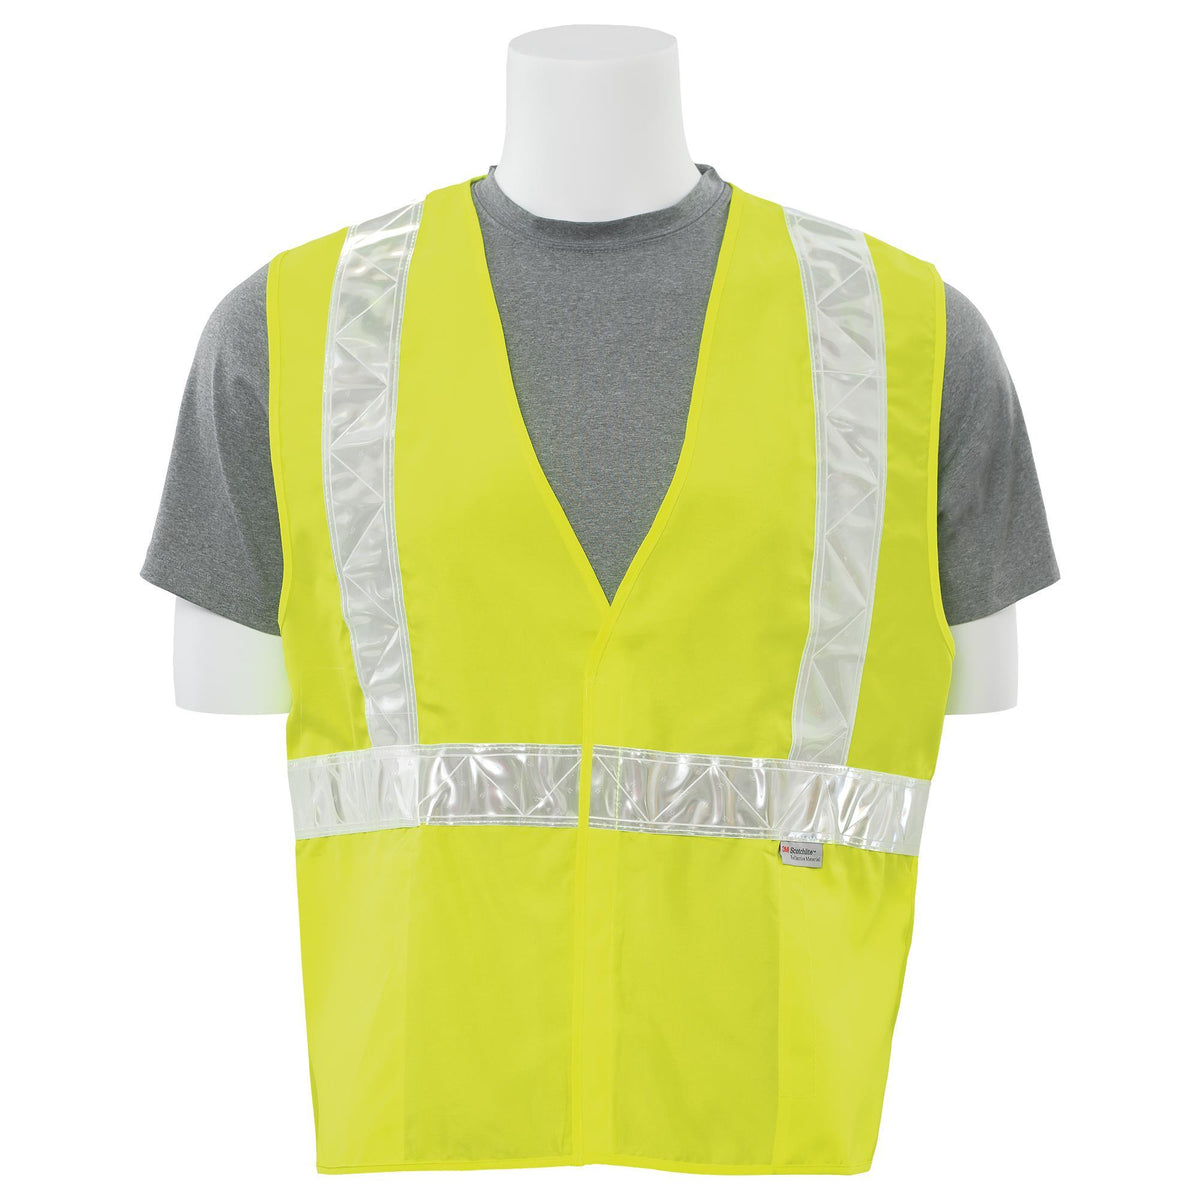 S17P Class 2 Safety Vest with Pockets and 3M® High-Gloss Trim 1PC